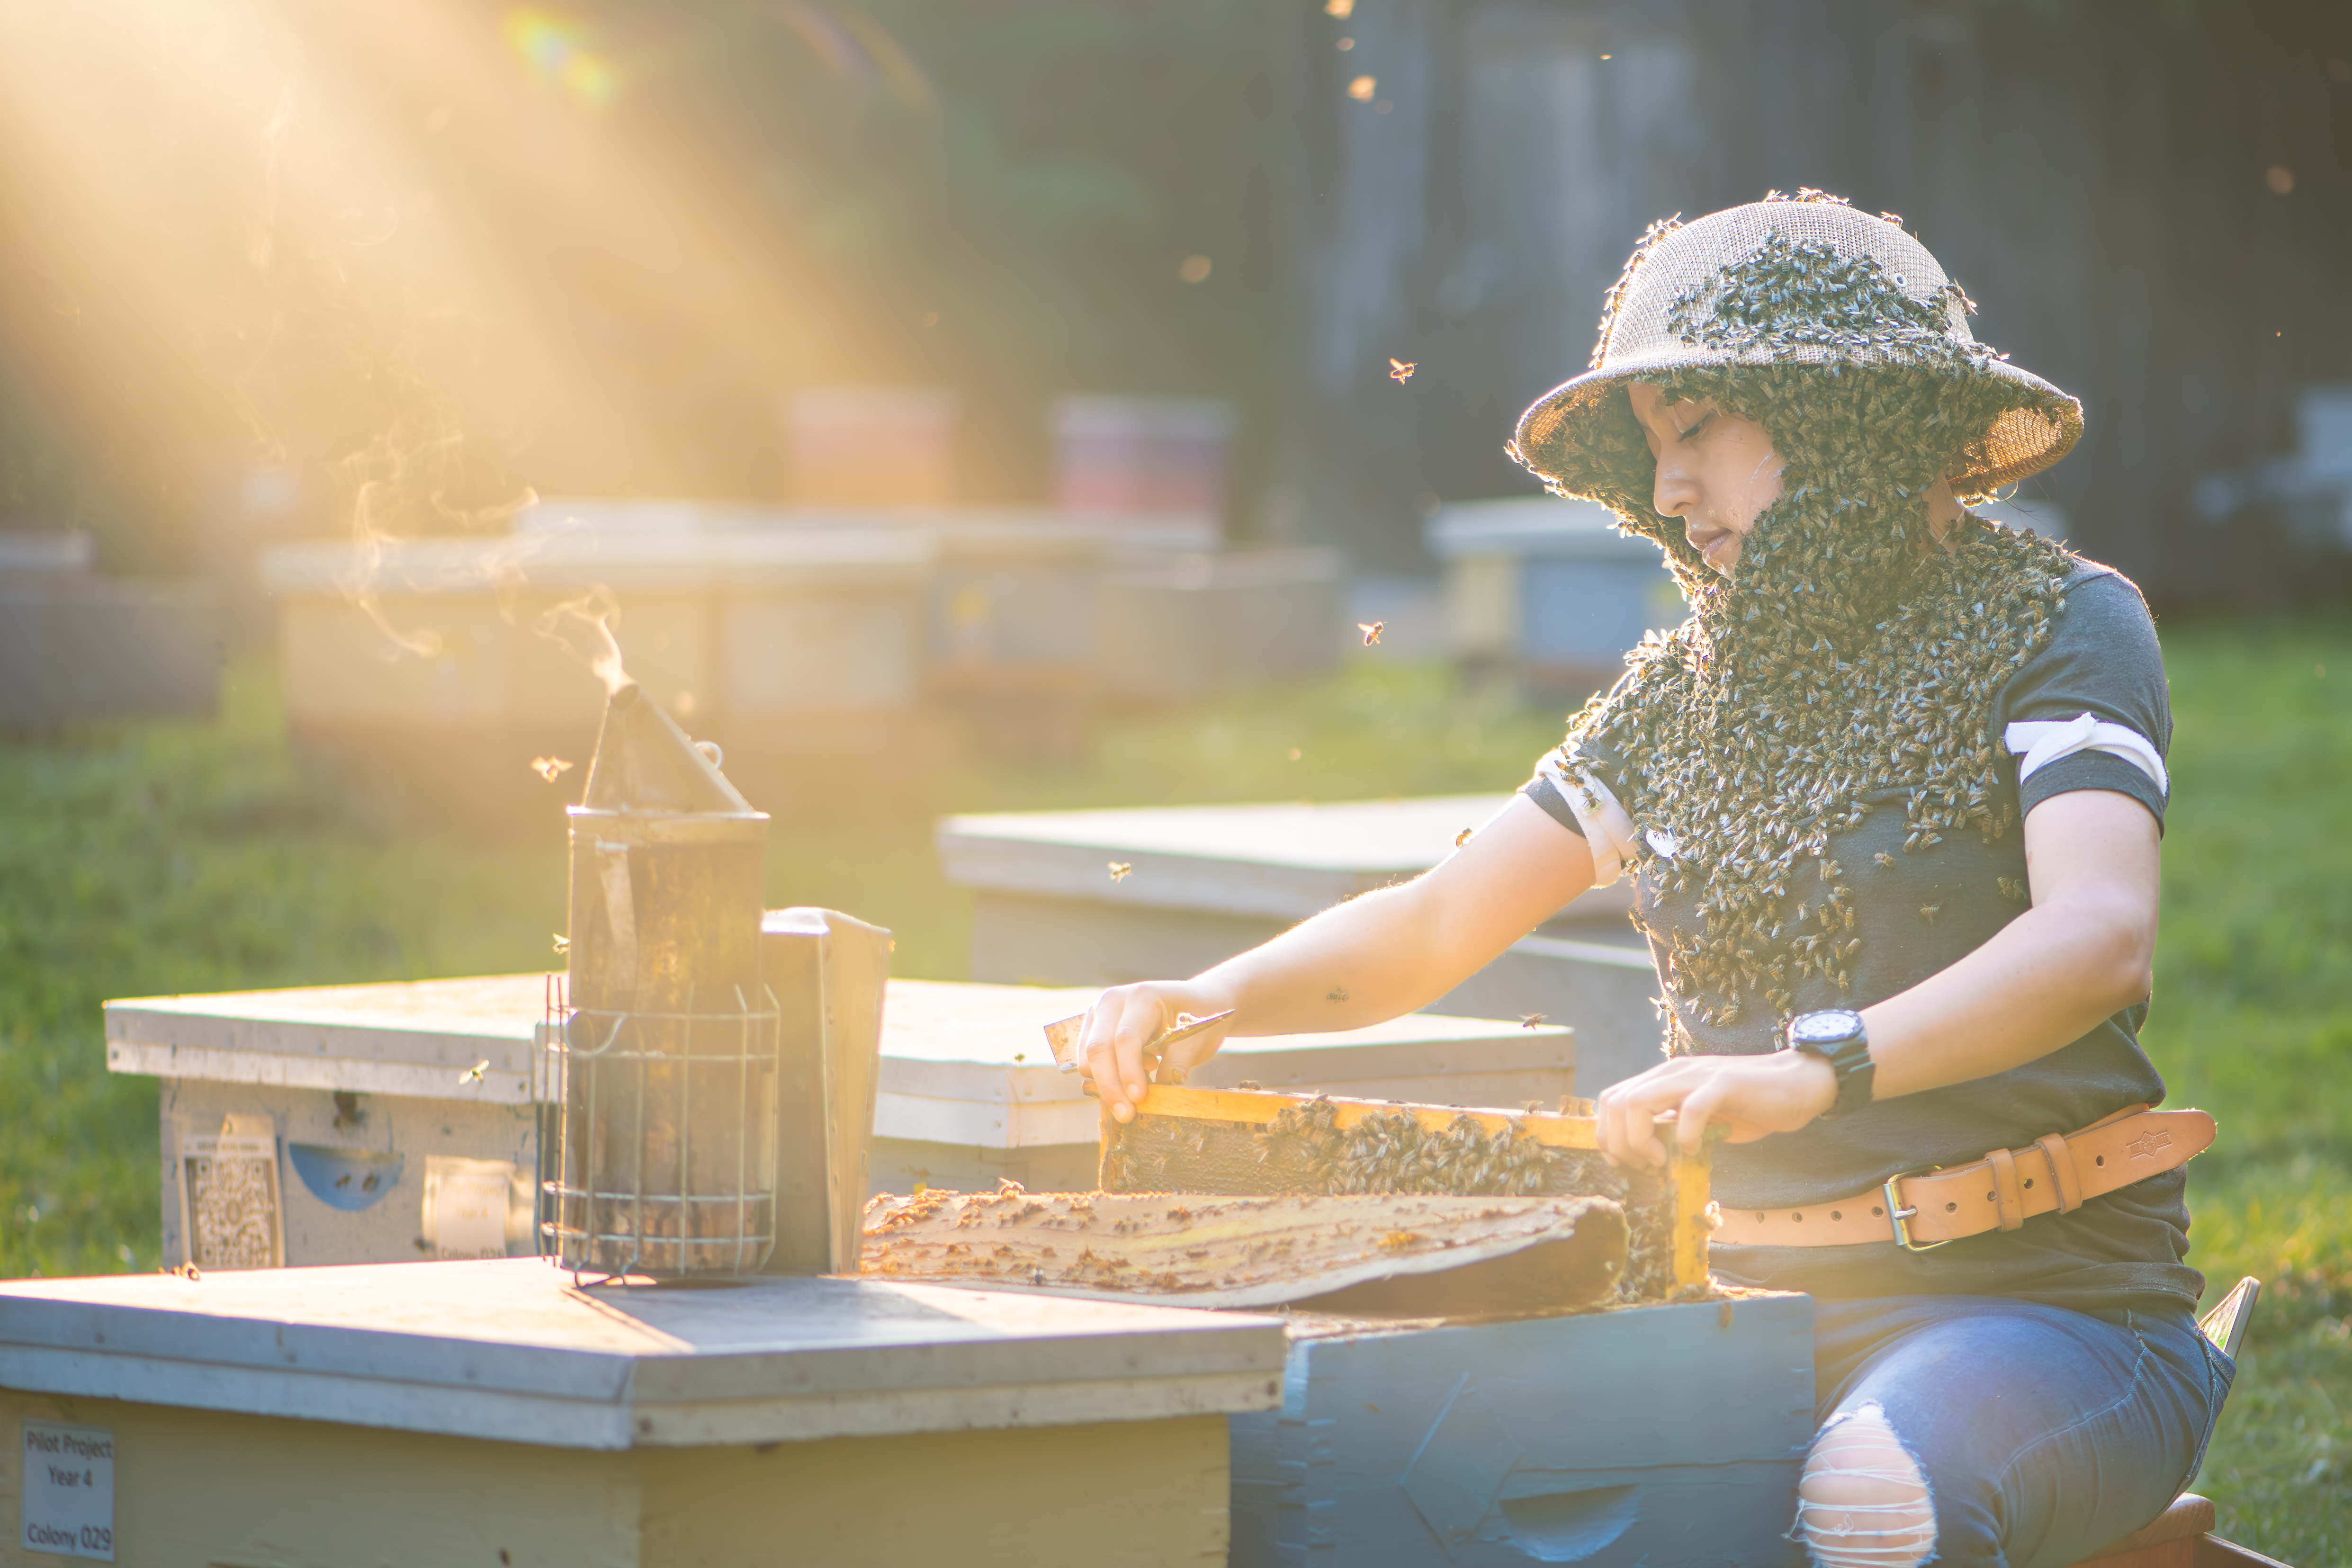 A female beekeeper sitting with a bees around her hate, neck, chest and shoulders.